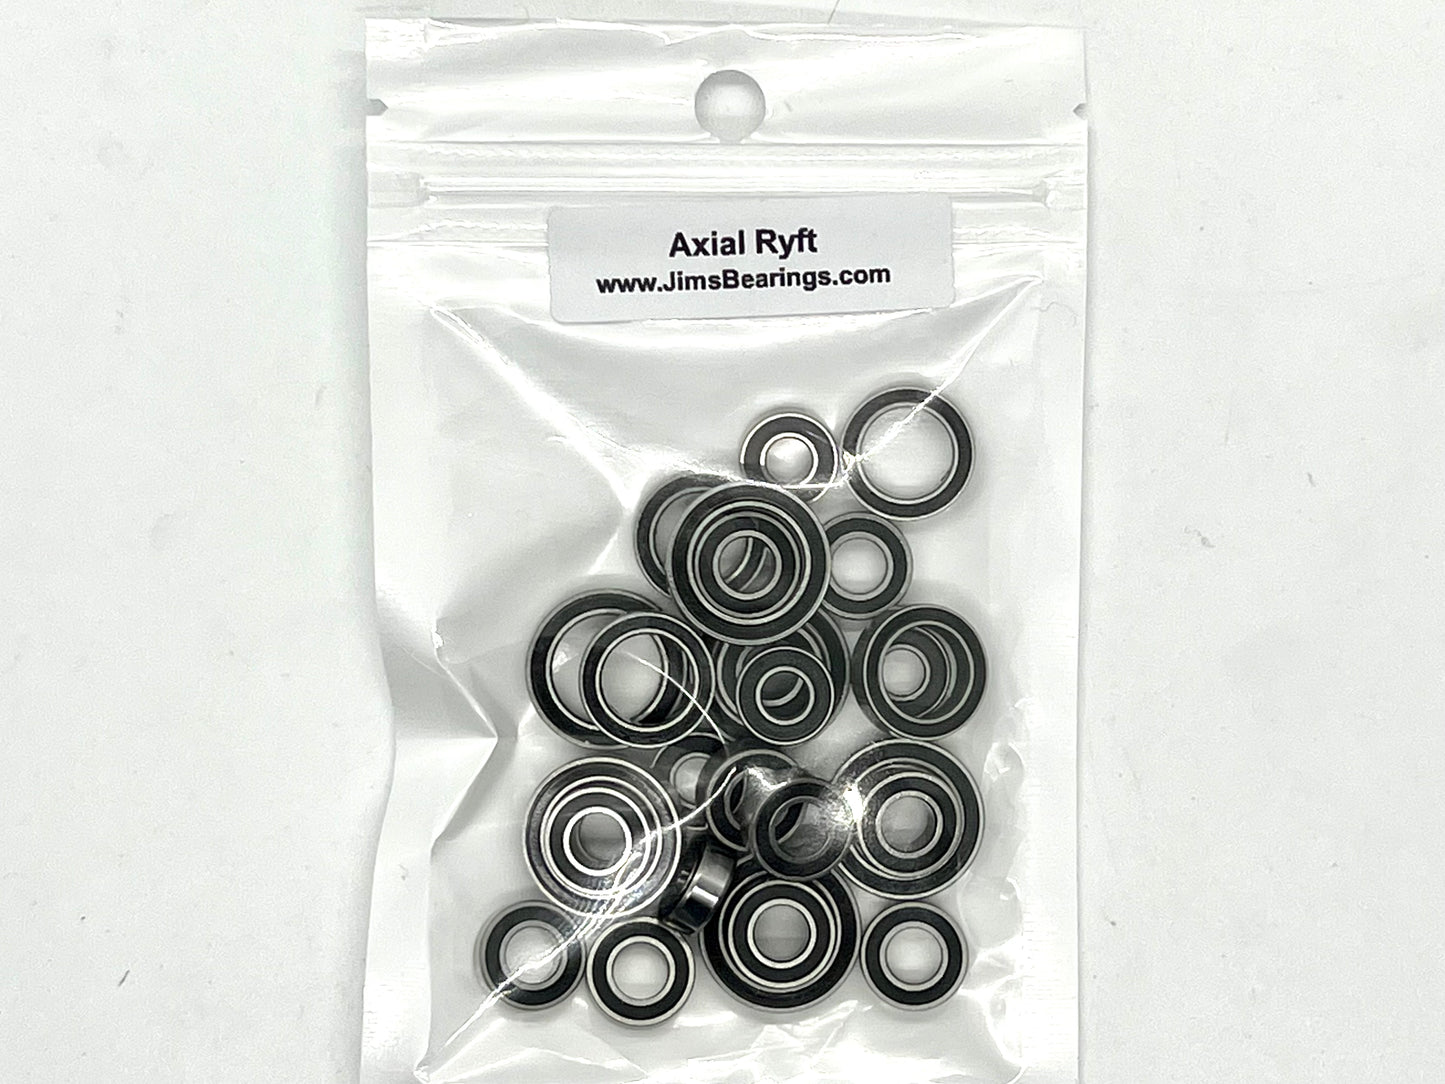 Jims Bearings for Axial Ryft